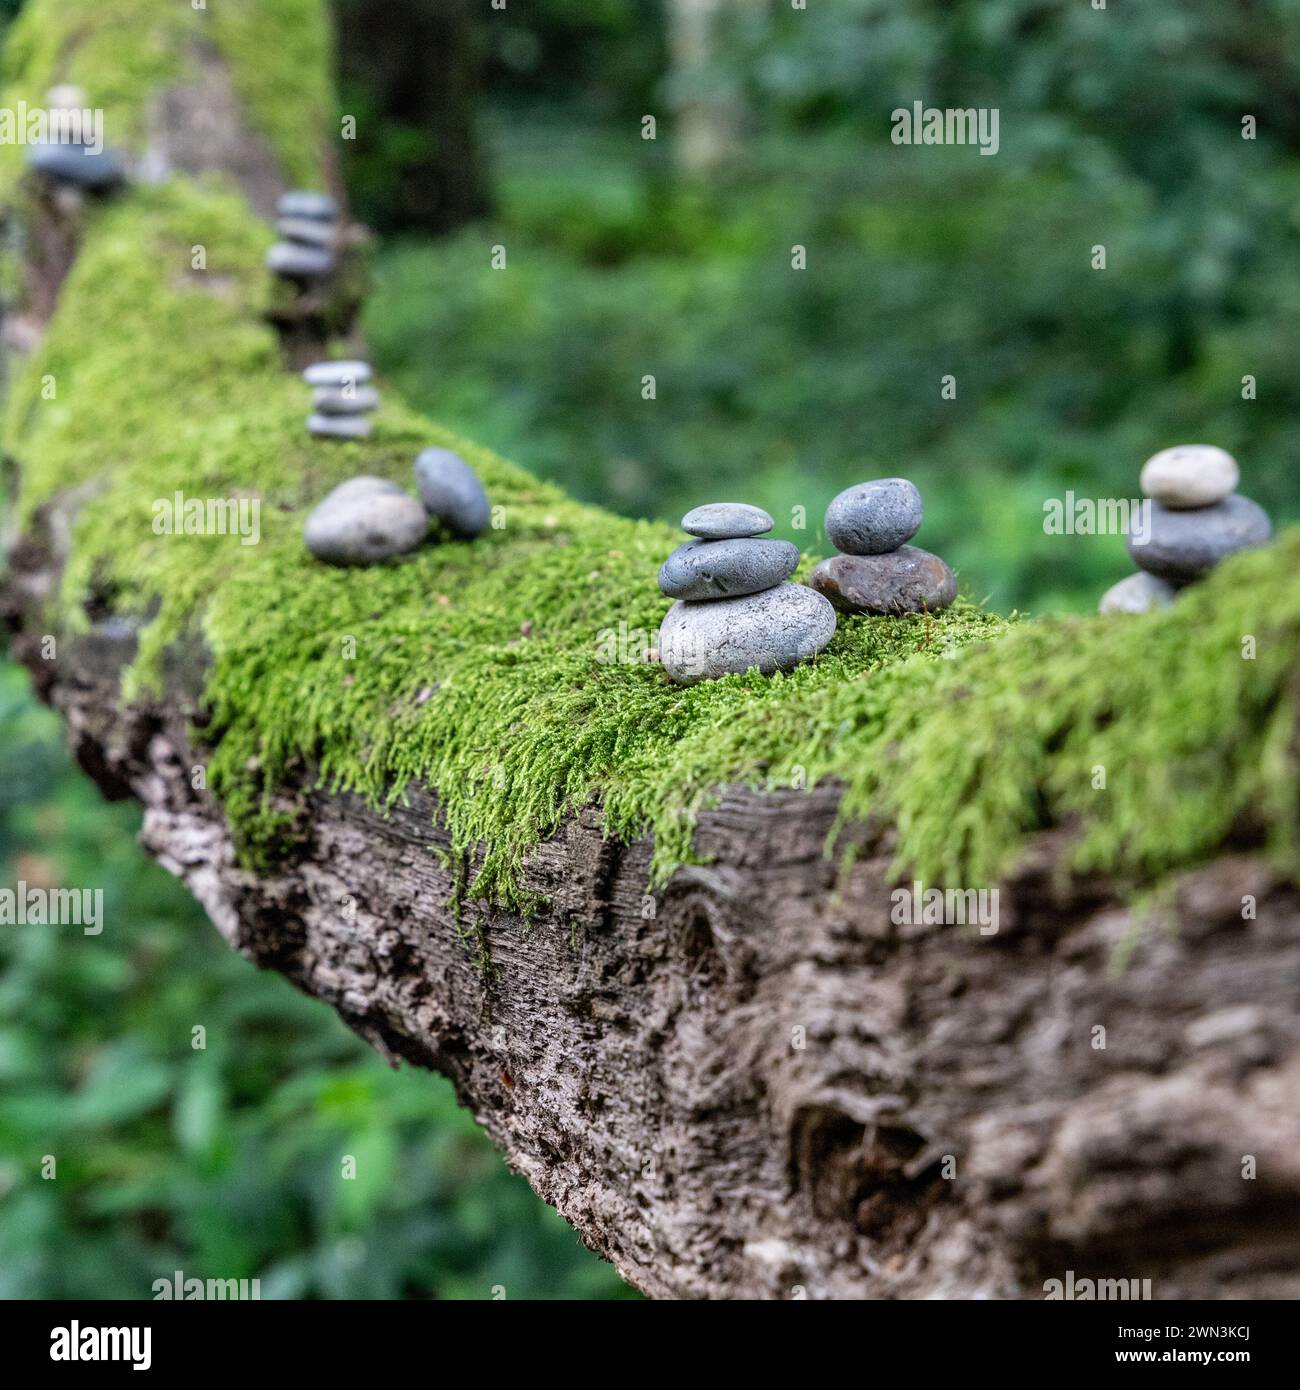 Pebbles on a tree branch Stock Photo